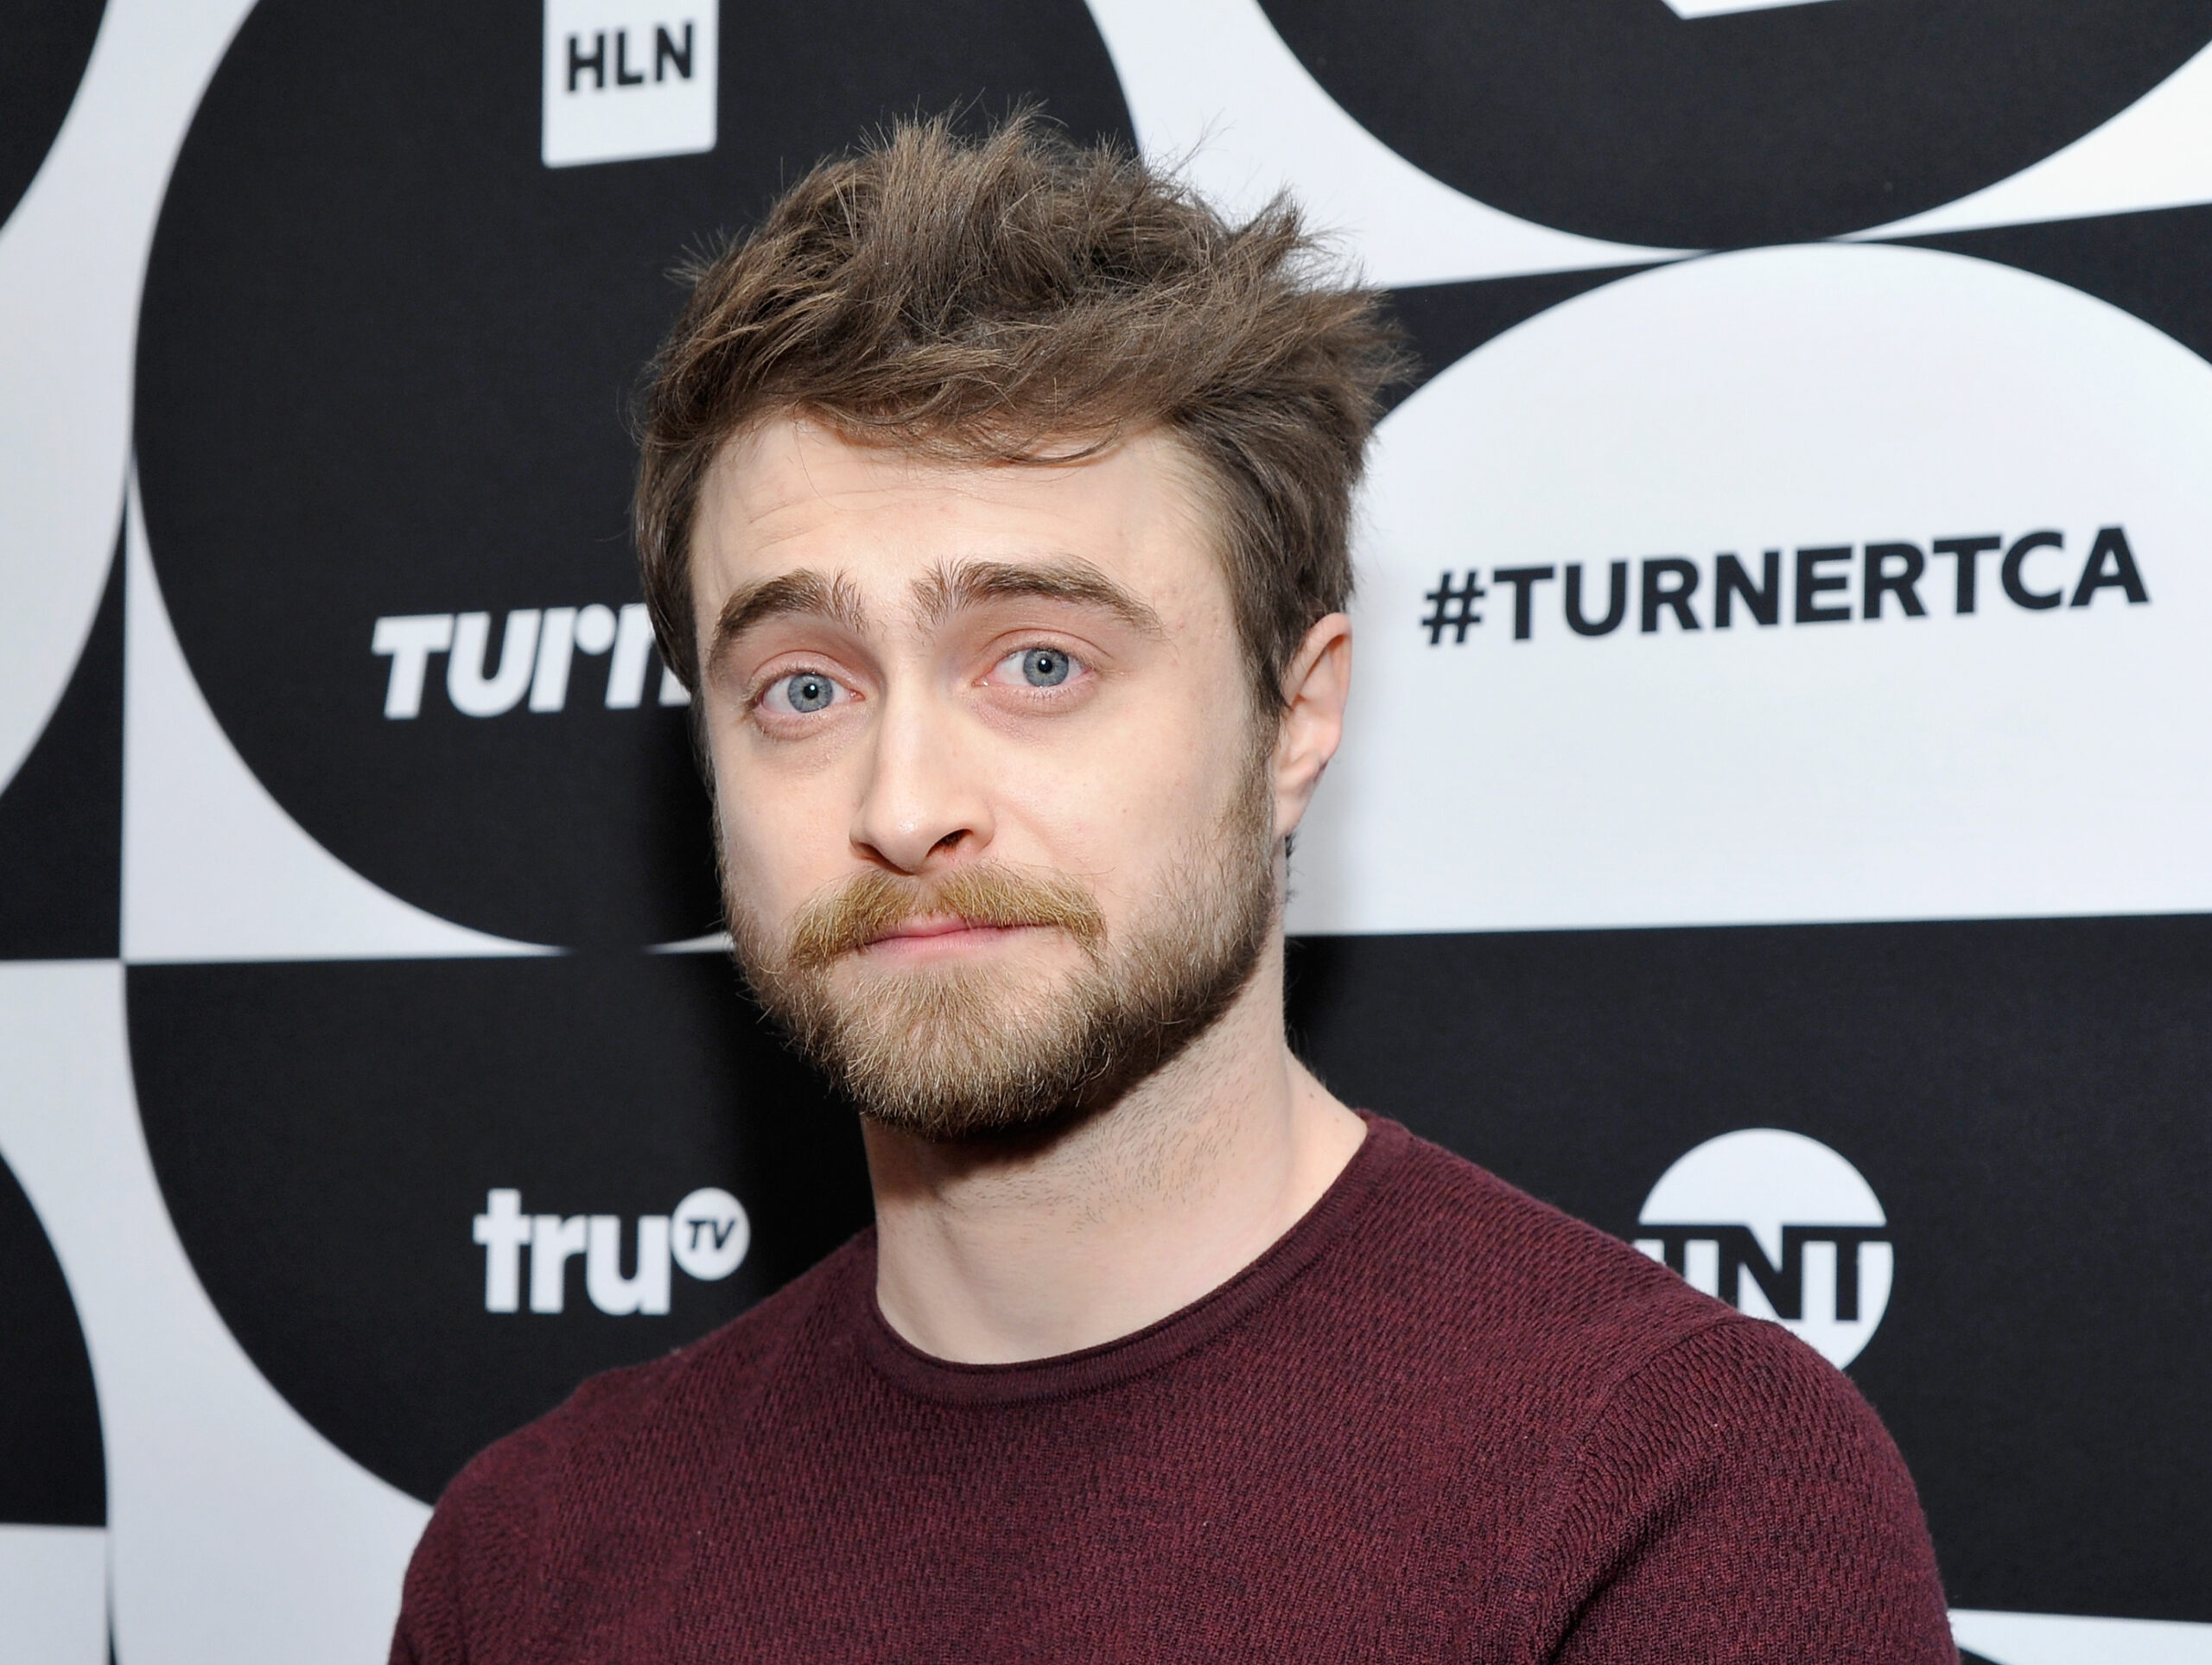 ‘Harry Potter’ Actor Daniel Radcliffe Insists Trans Youth Can ‘Tell Us Who They Are’